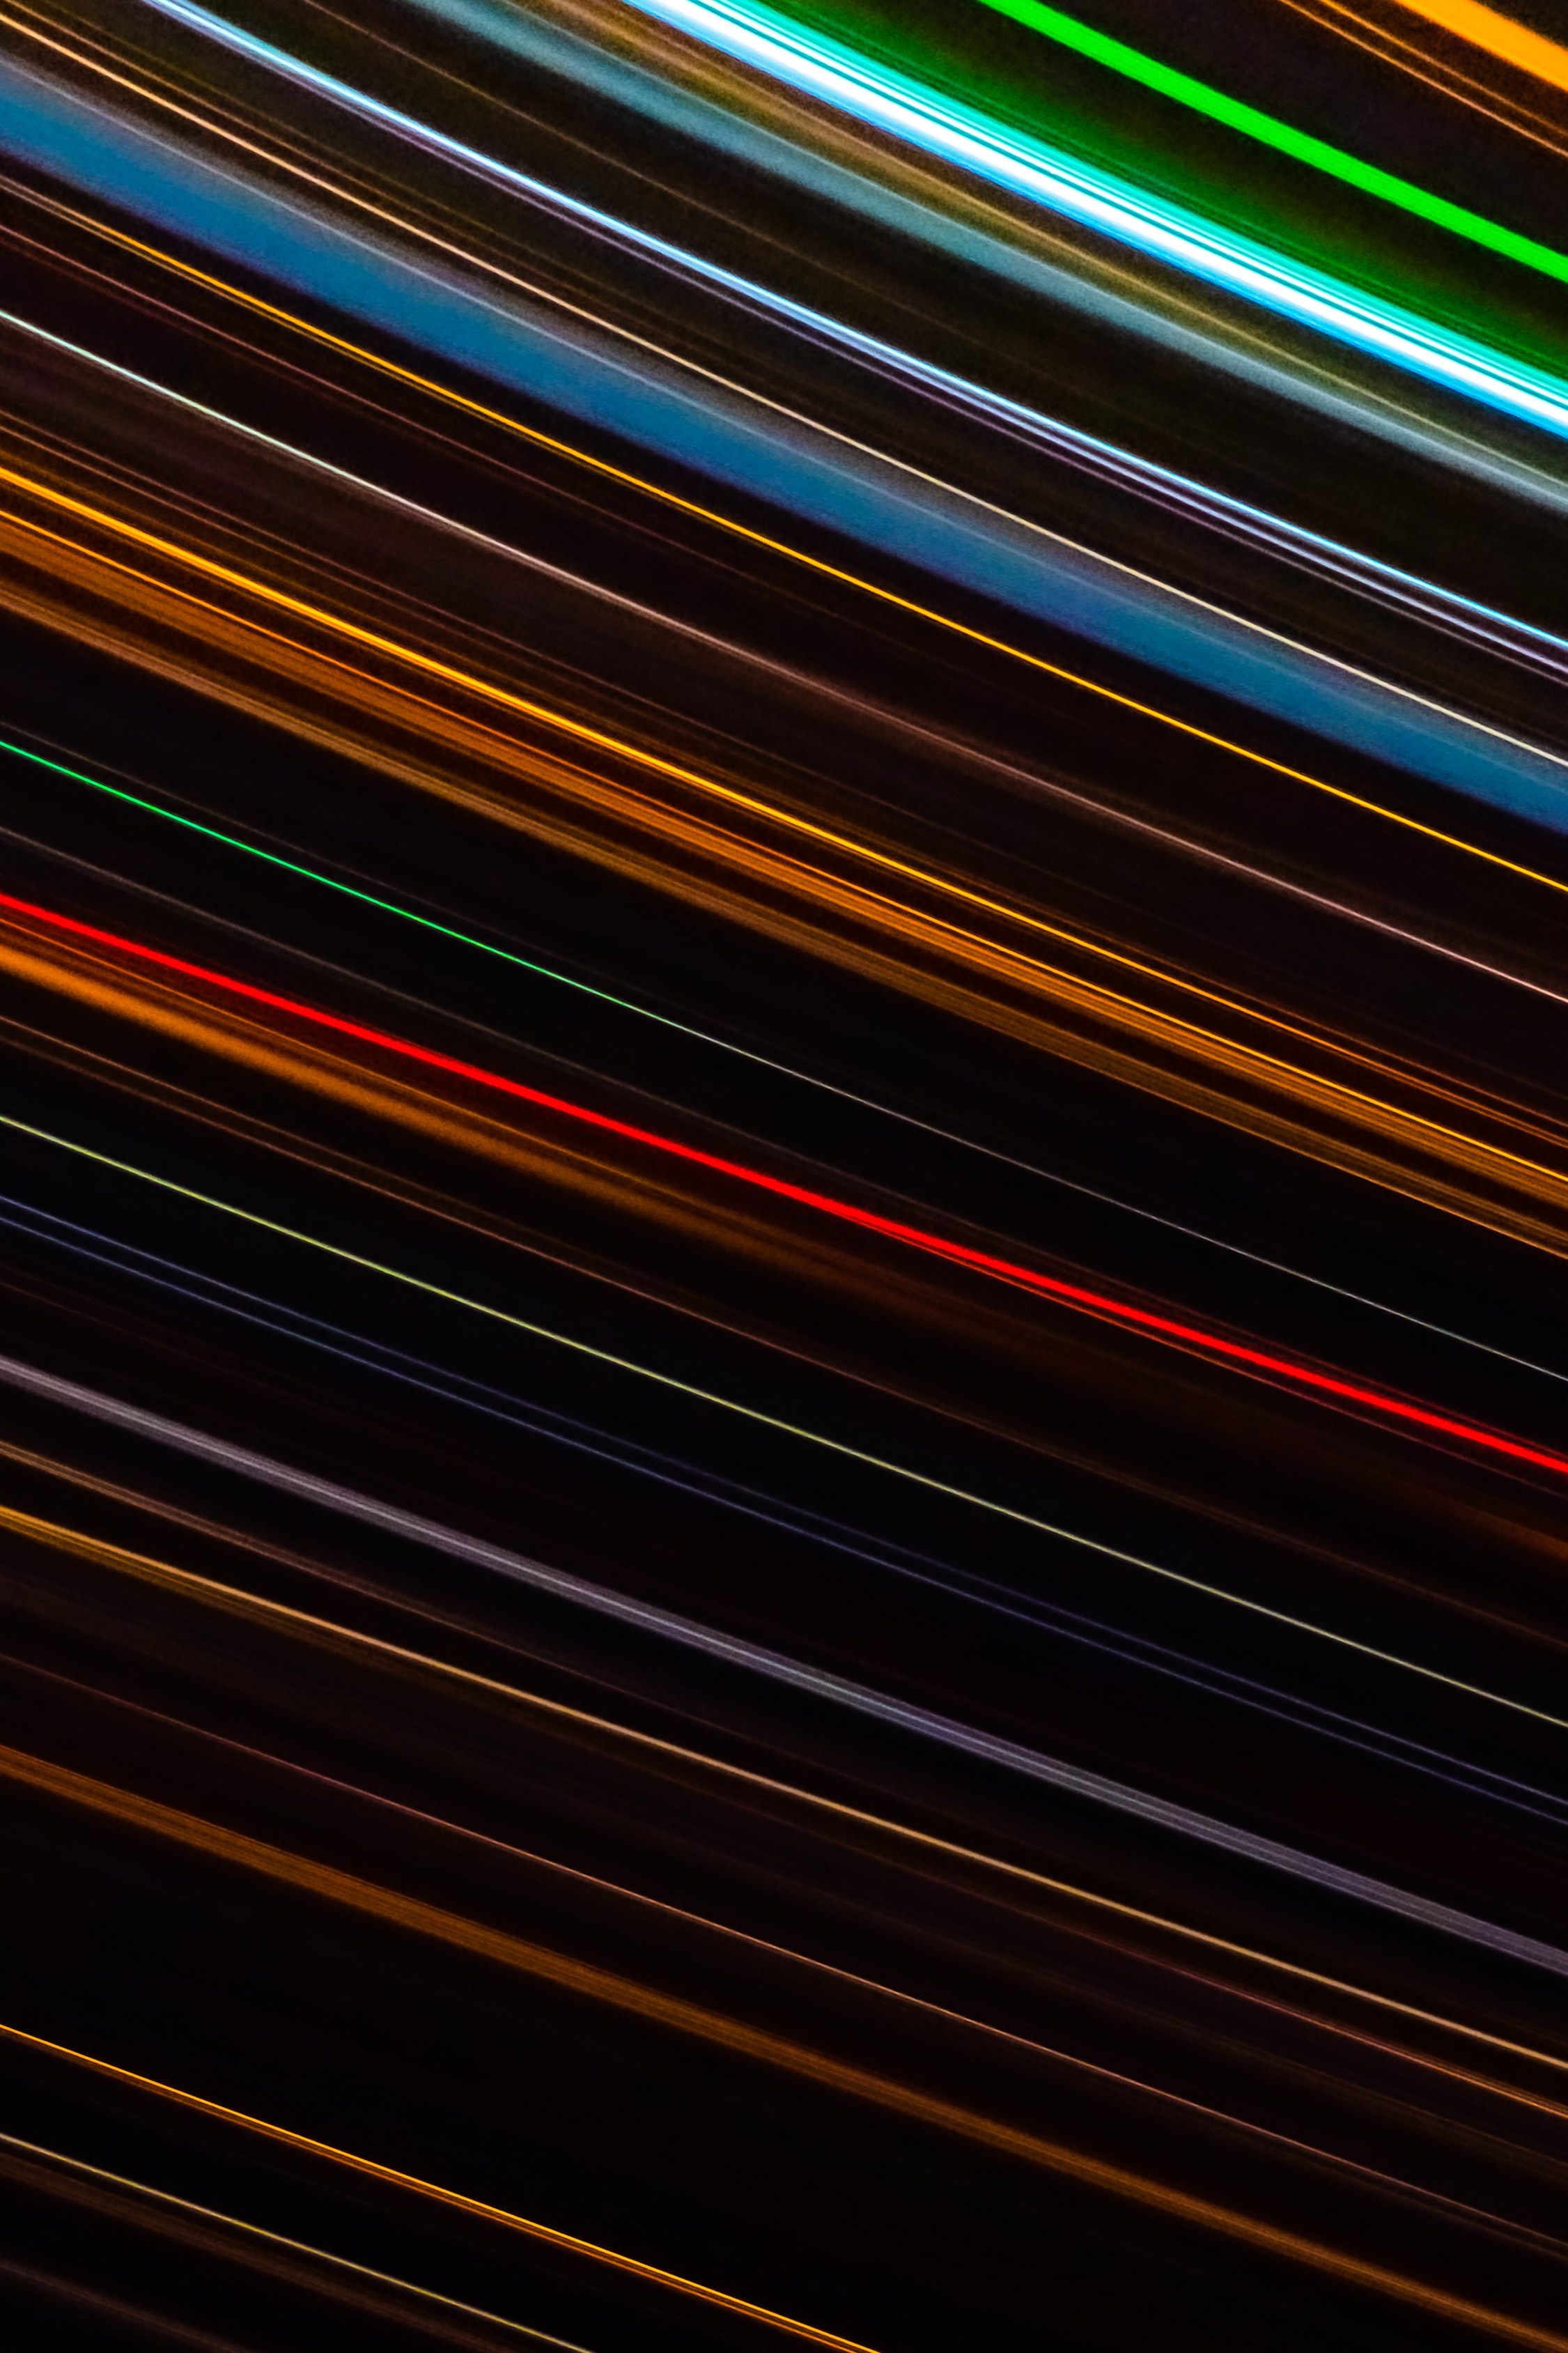 multicolored, abstract, shine, light, motley, lines, stripes, streaks Image for desktop